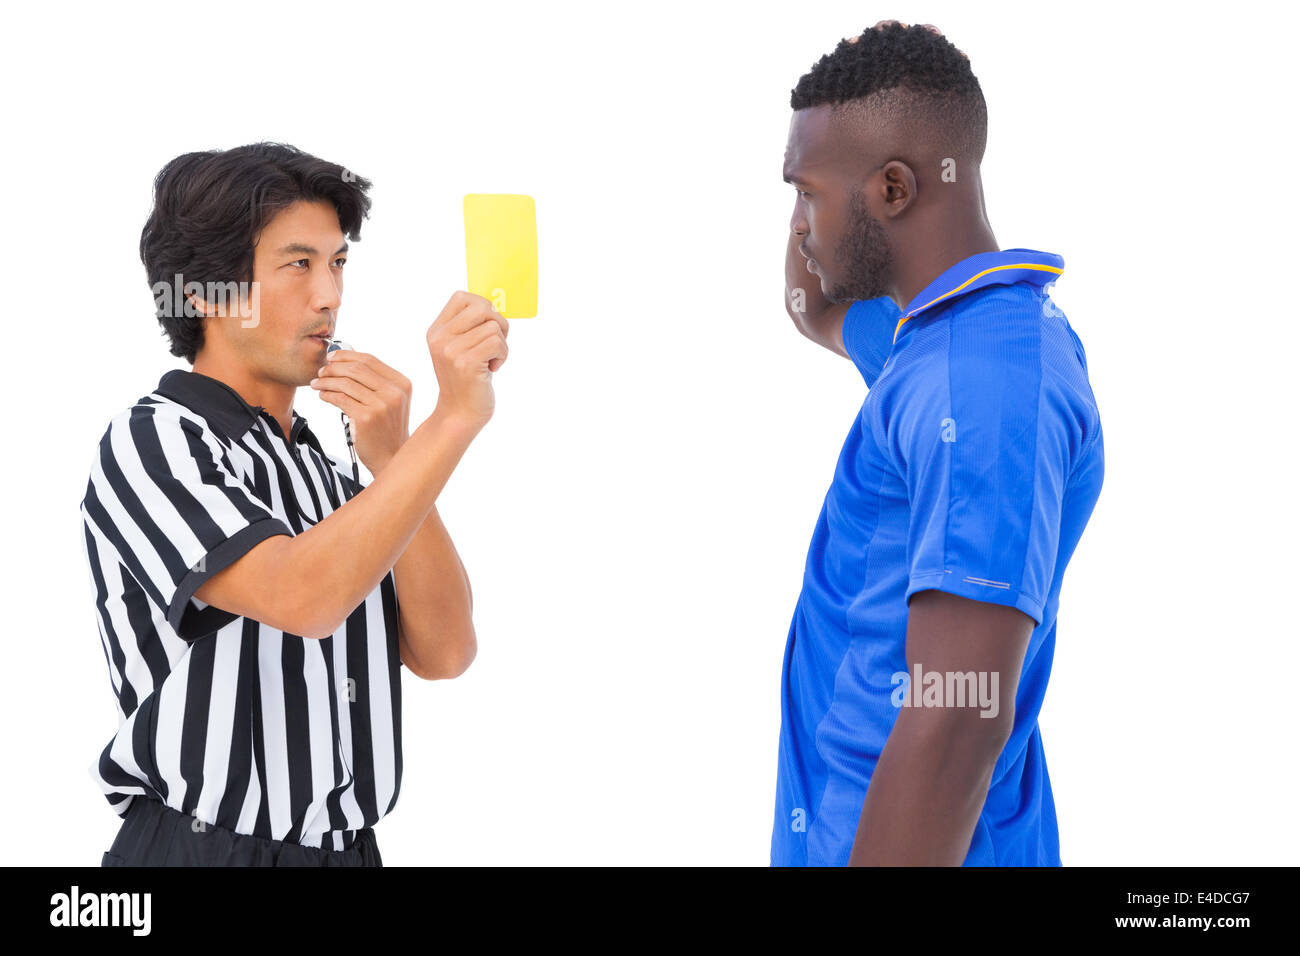 Referee showing yellow card to football player Stock Photo